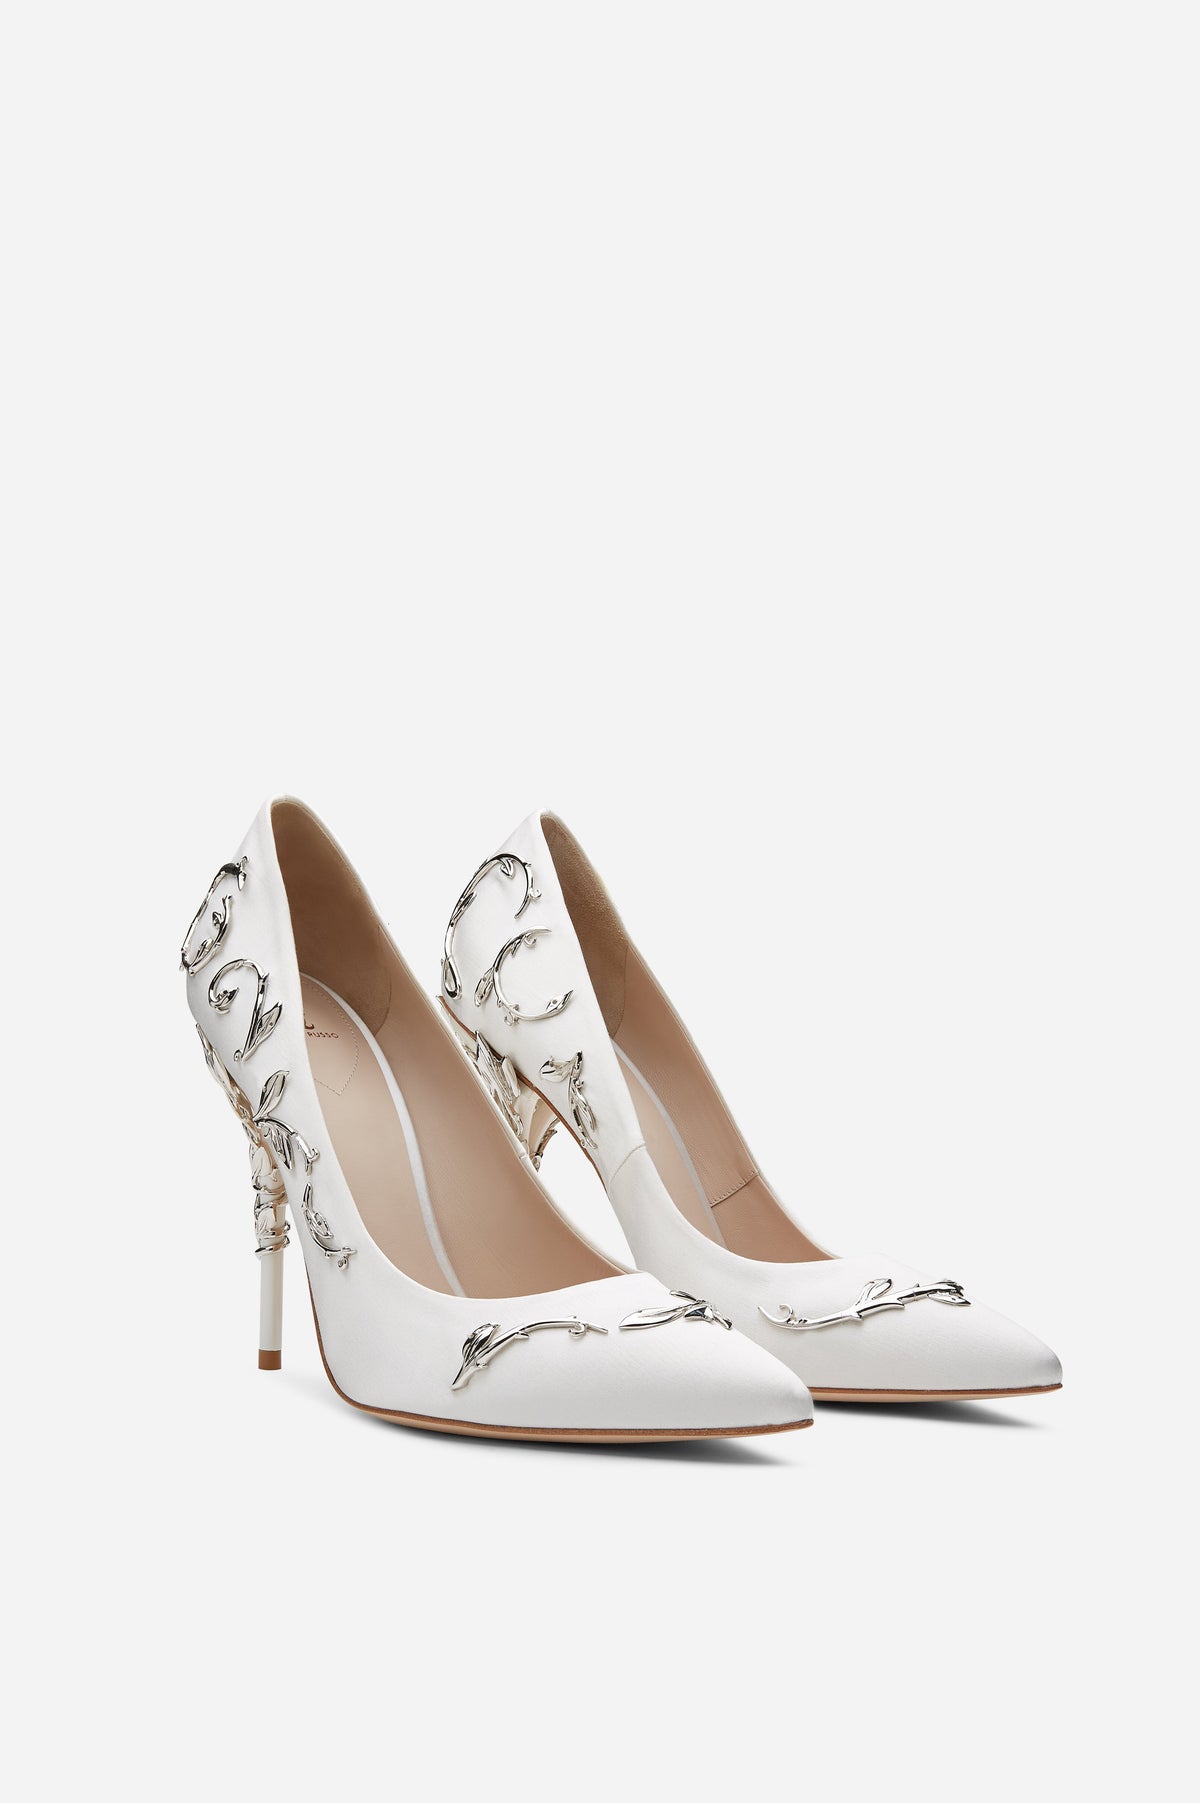 white and silver pumps